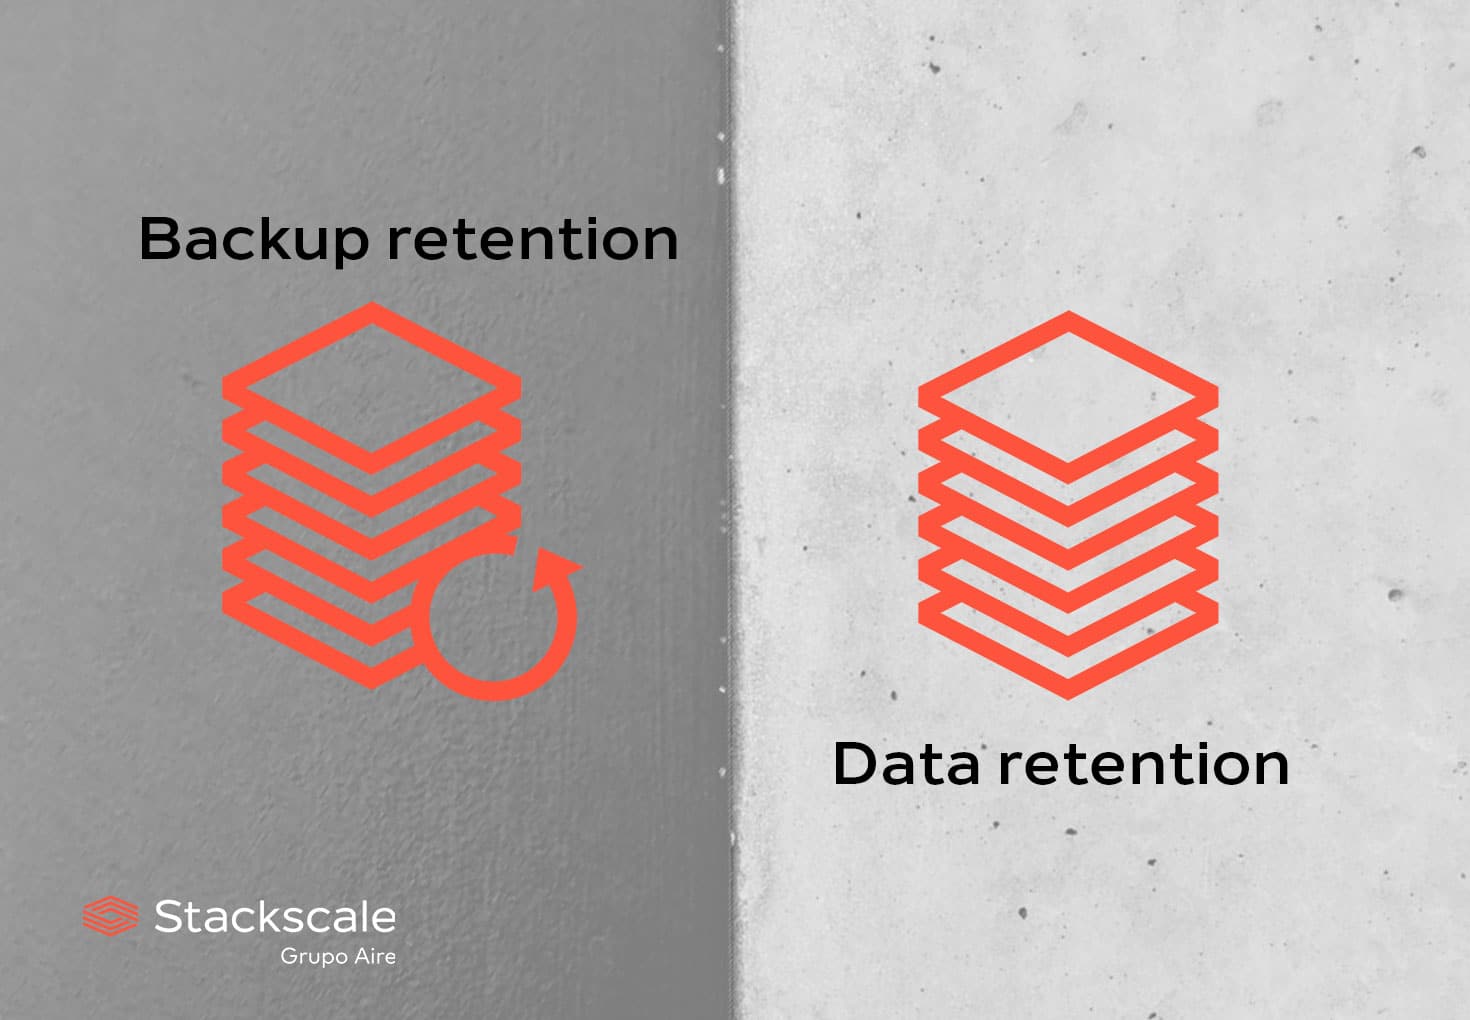 The difference between backup and data retention